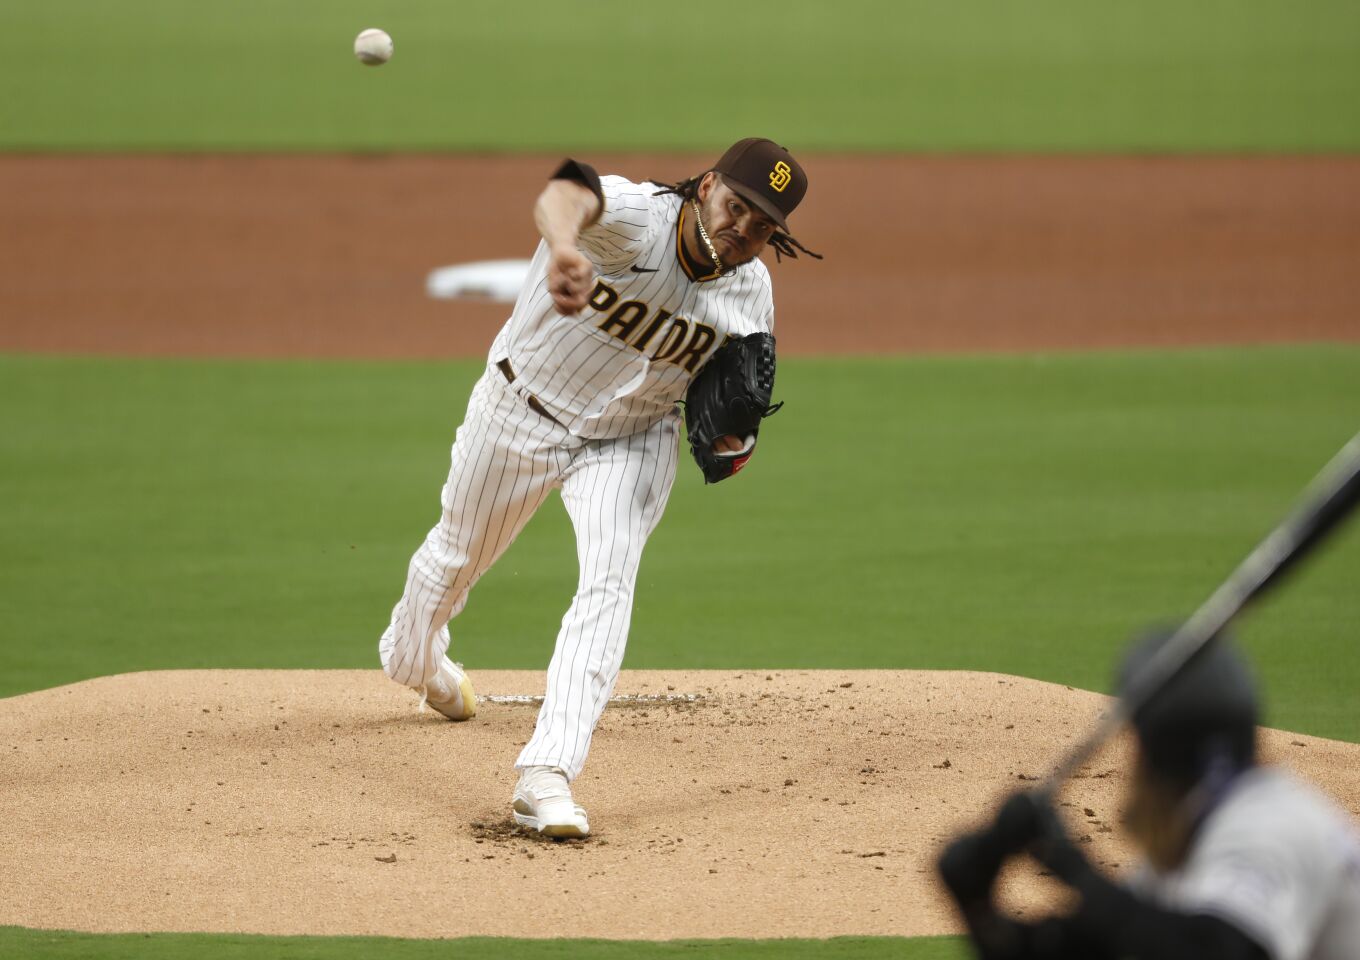 San Diego Padres pitcher Dinelson Lamet throws against the Colorado Rockies.